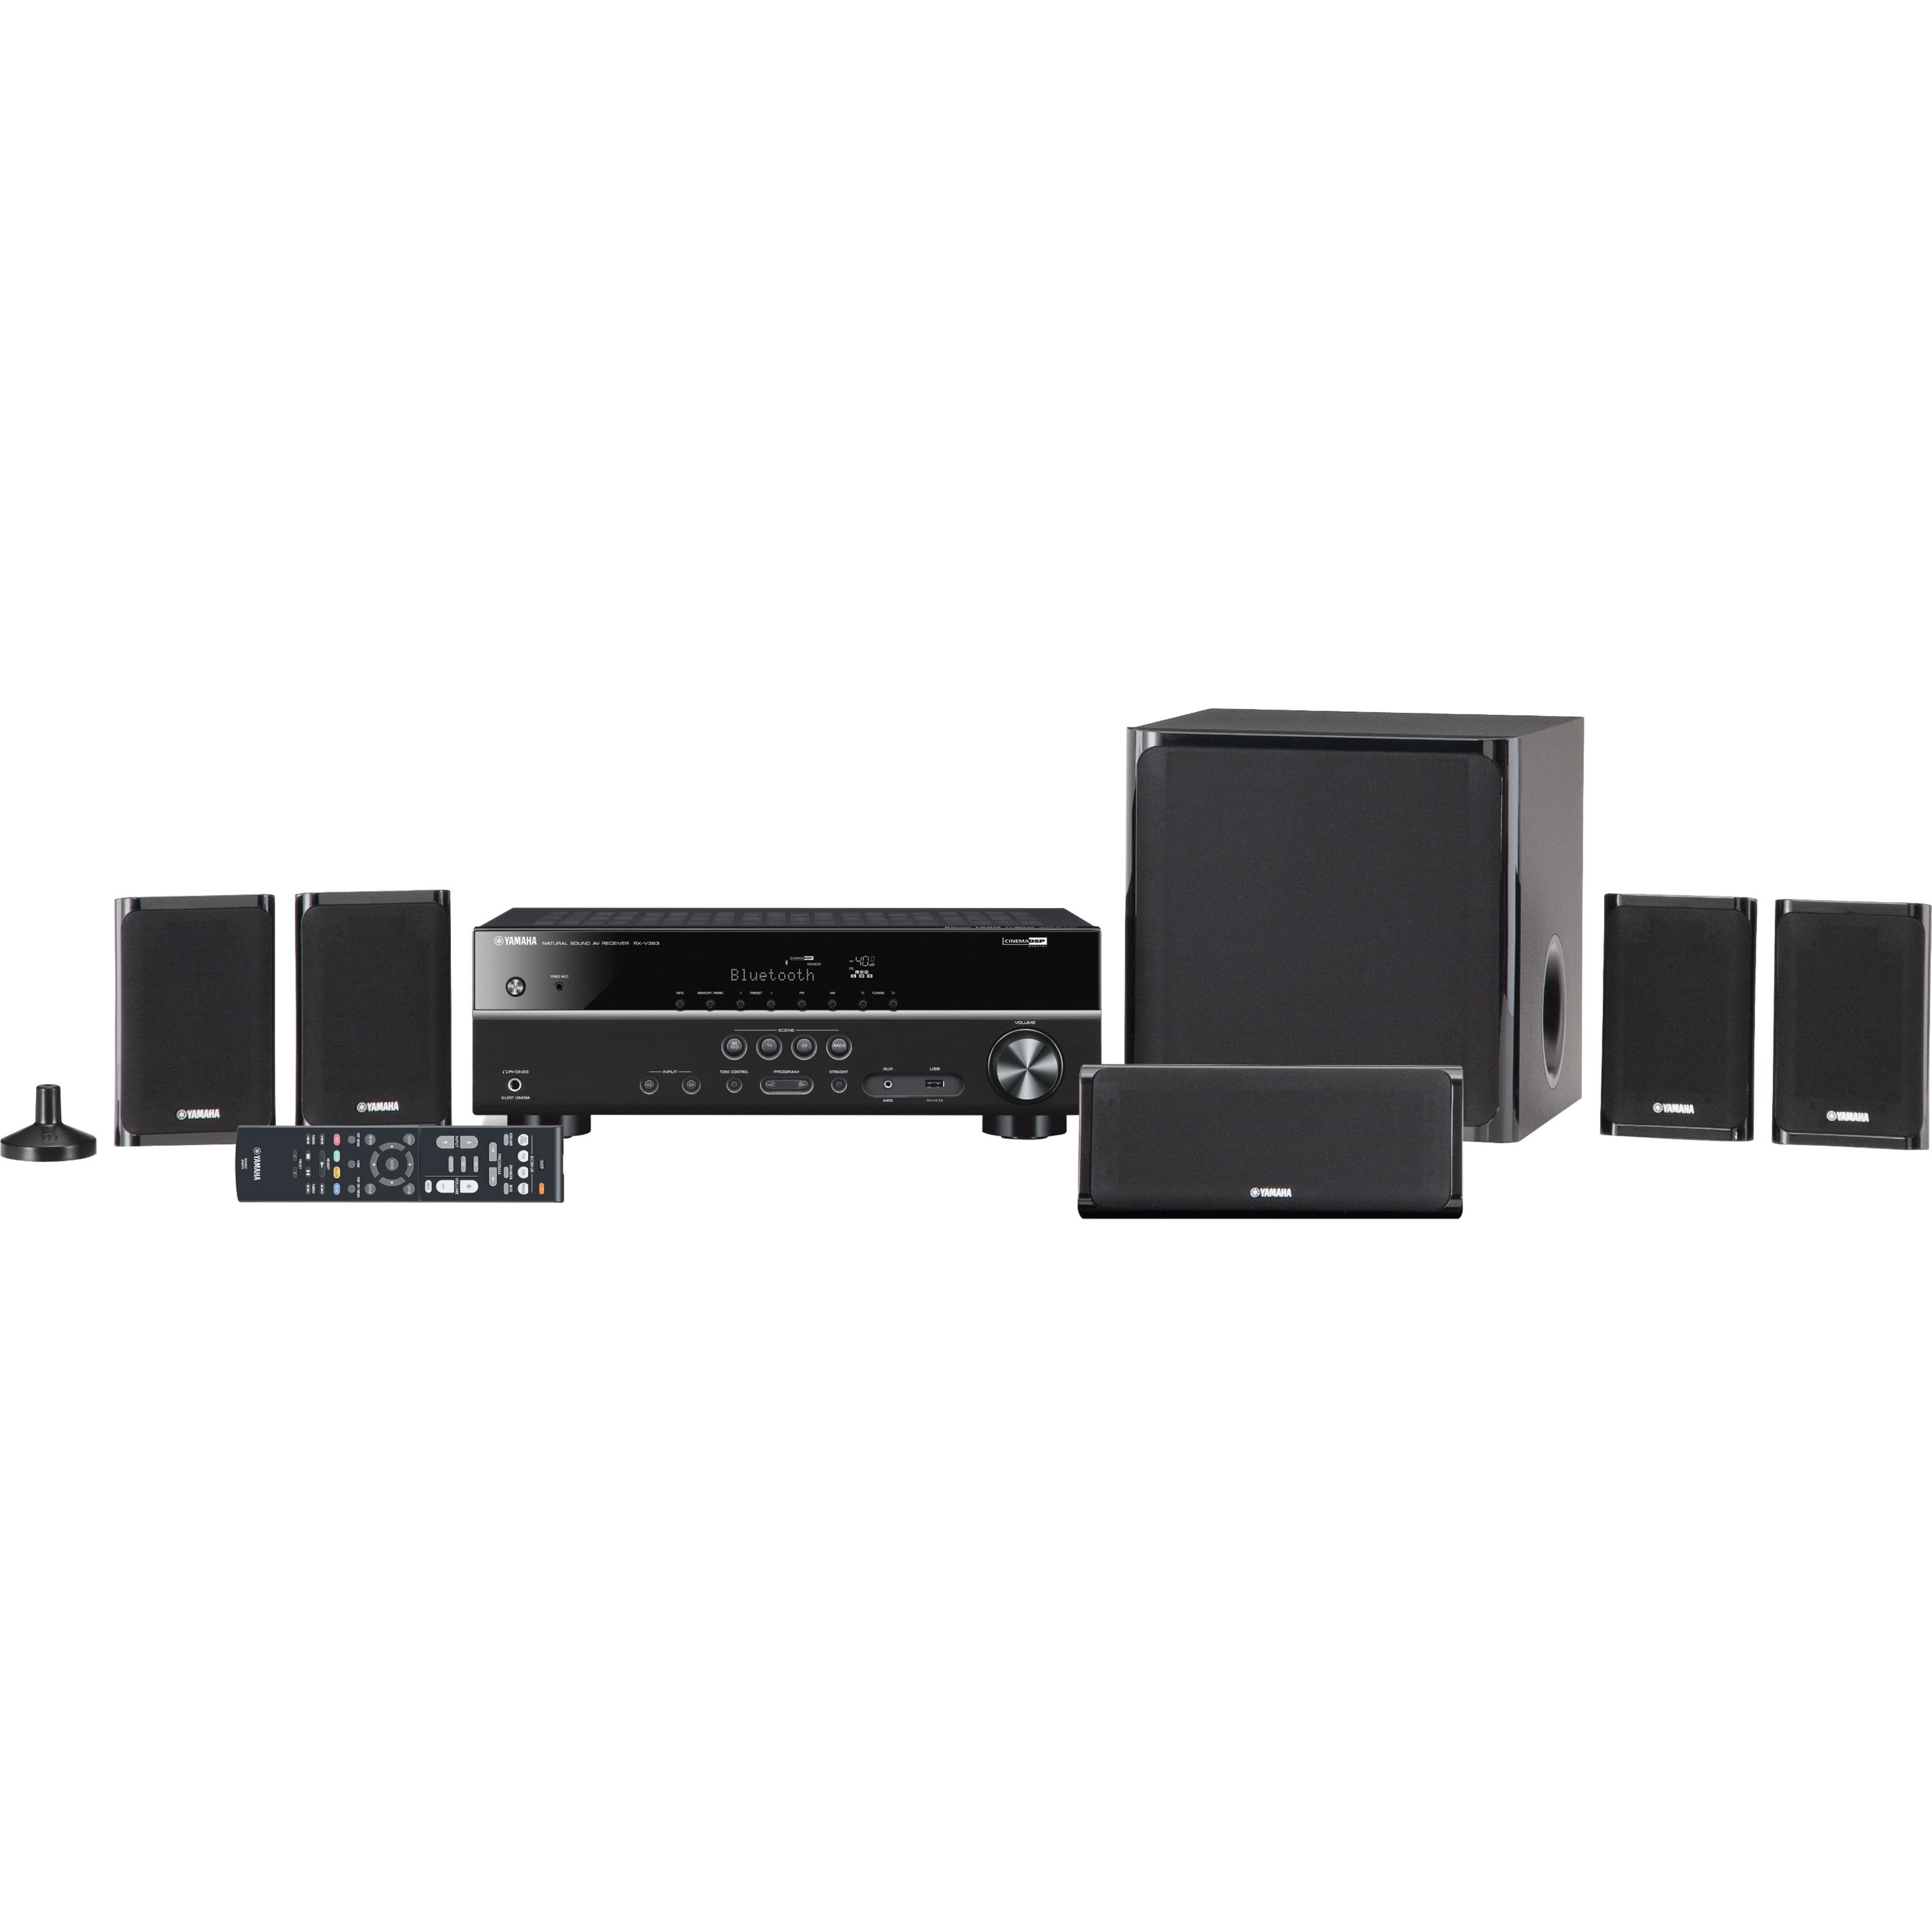 Yamaha YHT-4930UBL 5.1 Home Theater System, 250 W RMS, A/V